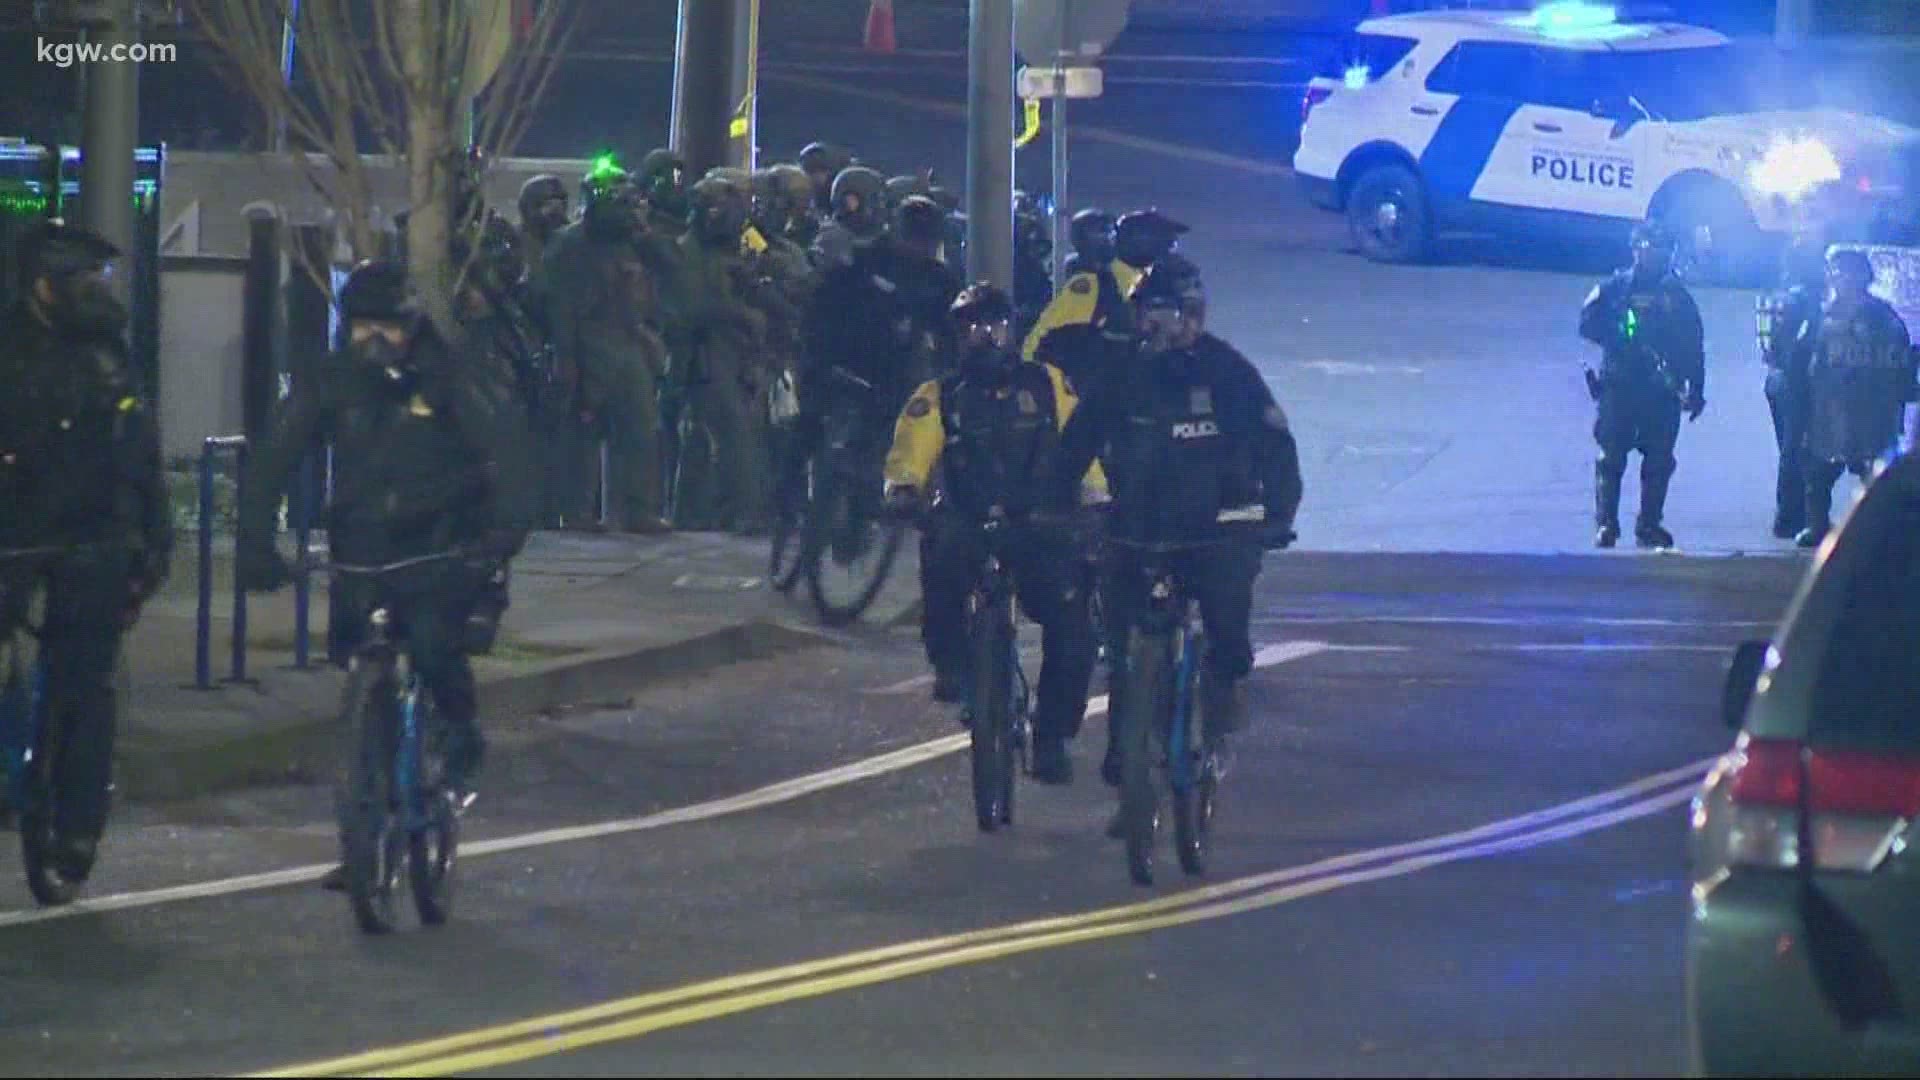 Mayor Ted Wheeler addressed how police responded to demonstrations following the inauguration of Joe Biden.